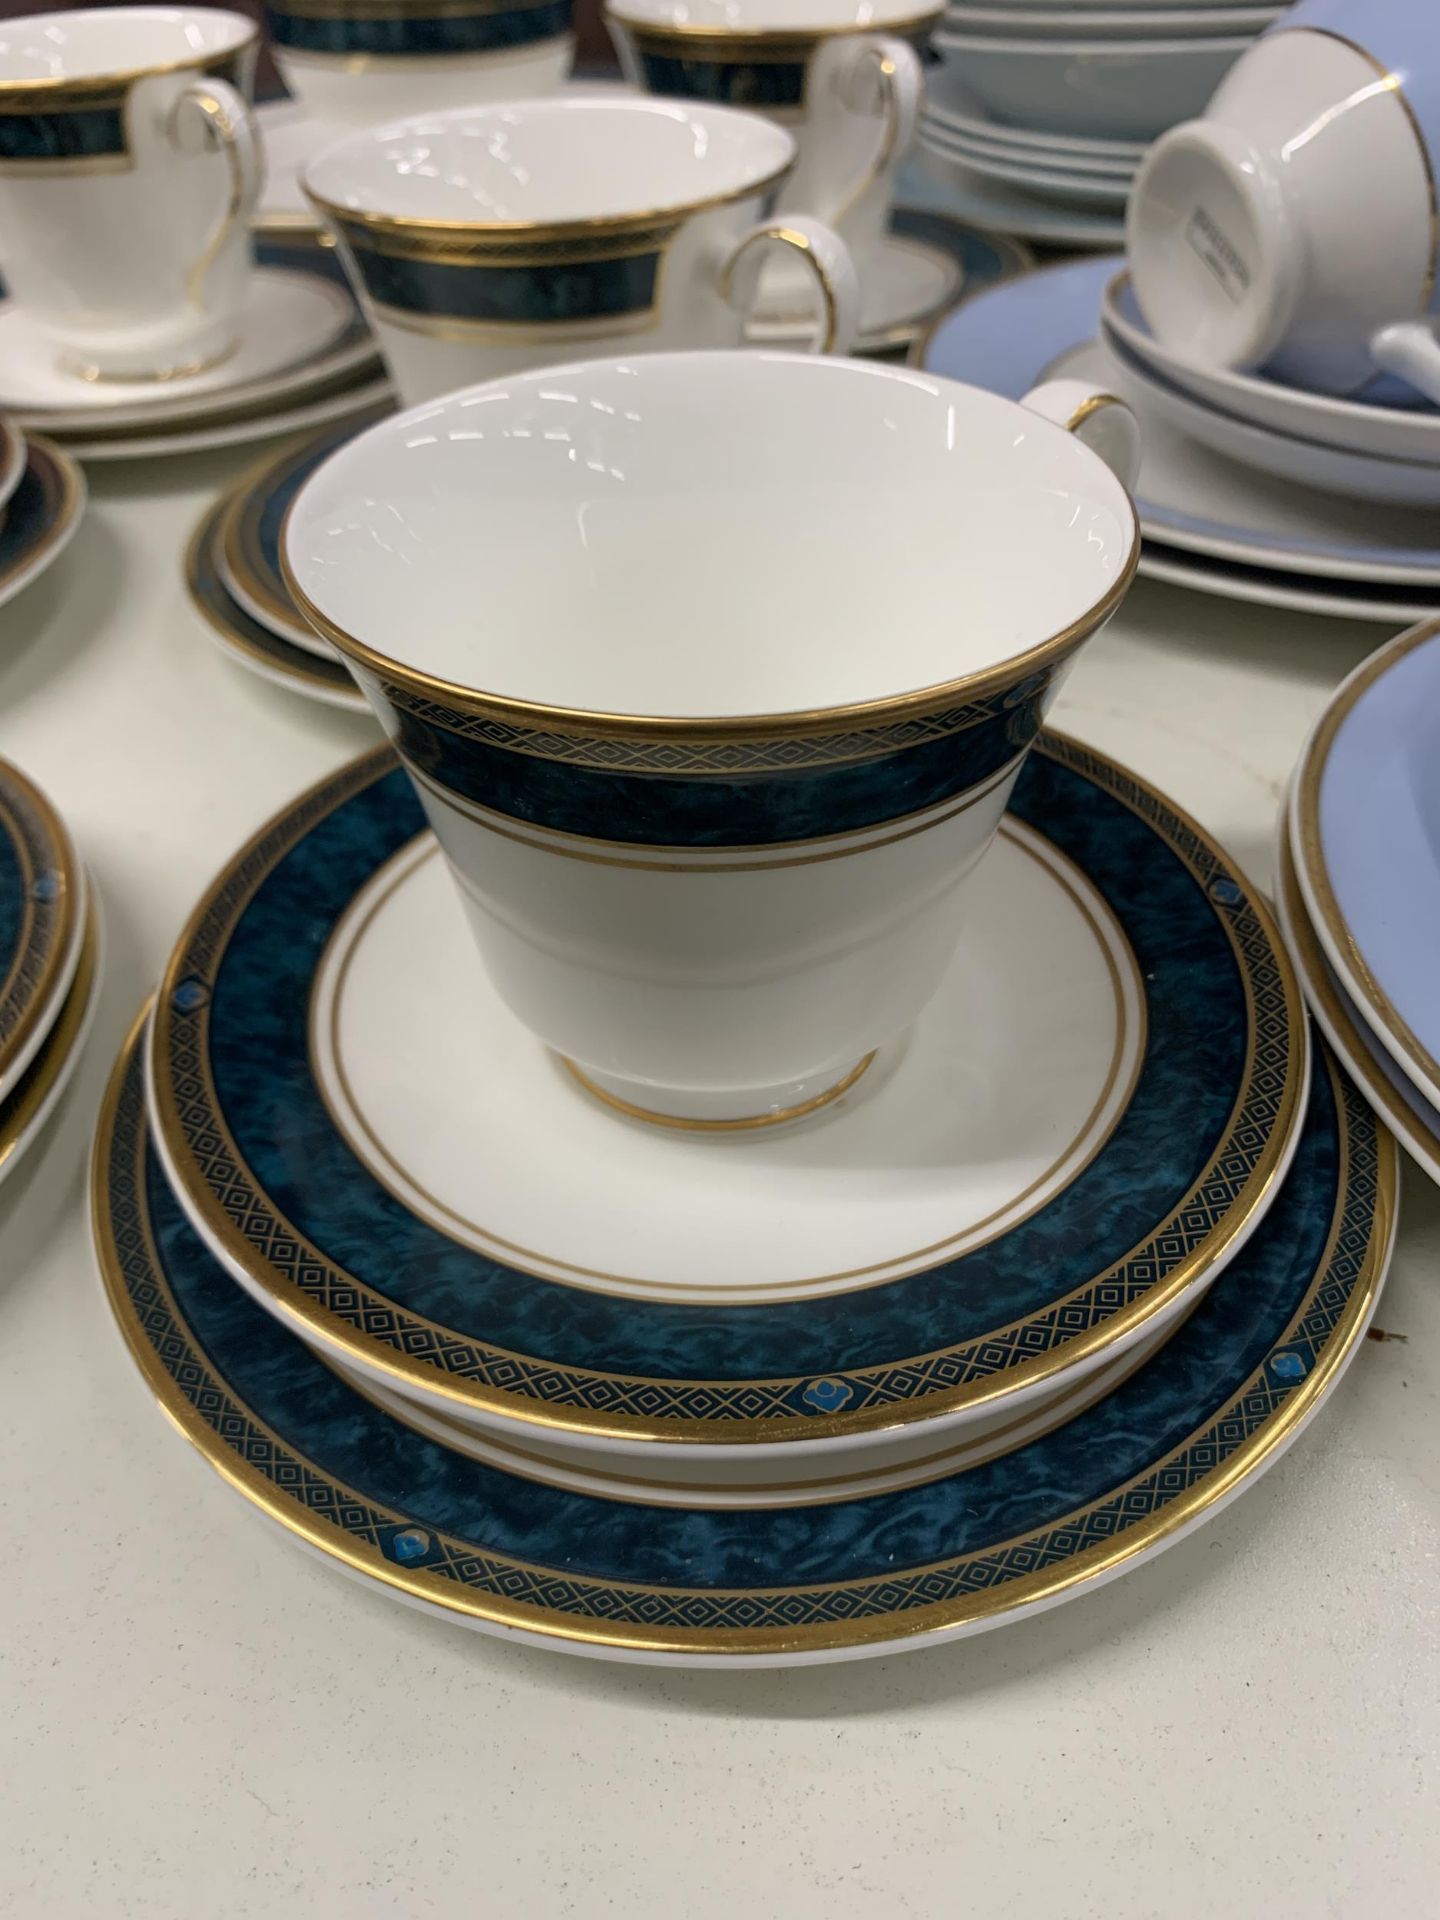 A QUANTITY OF ROYAL DOULTON TEAWARE TO INCLUDE 'CANTON', PLATES, A LARGE BOWL, PLANTER LIDDED - Image 2 of 7